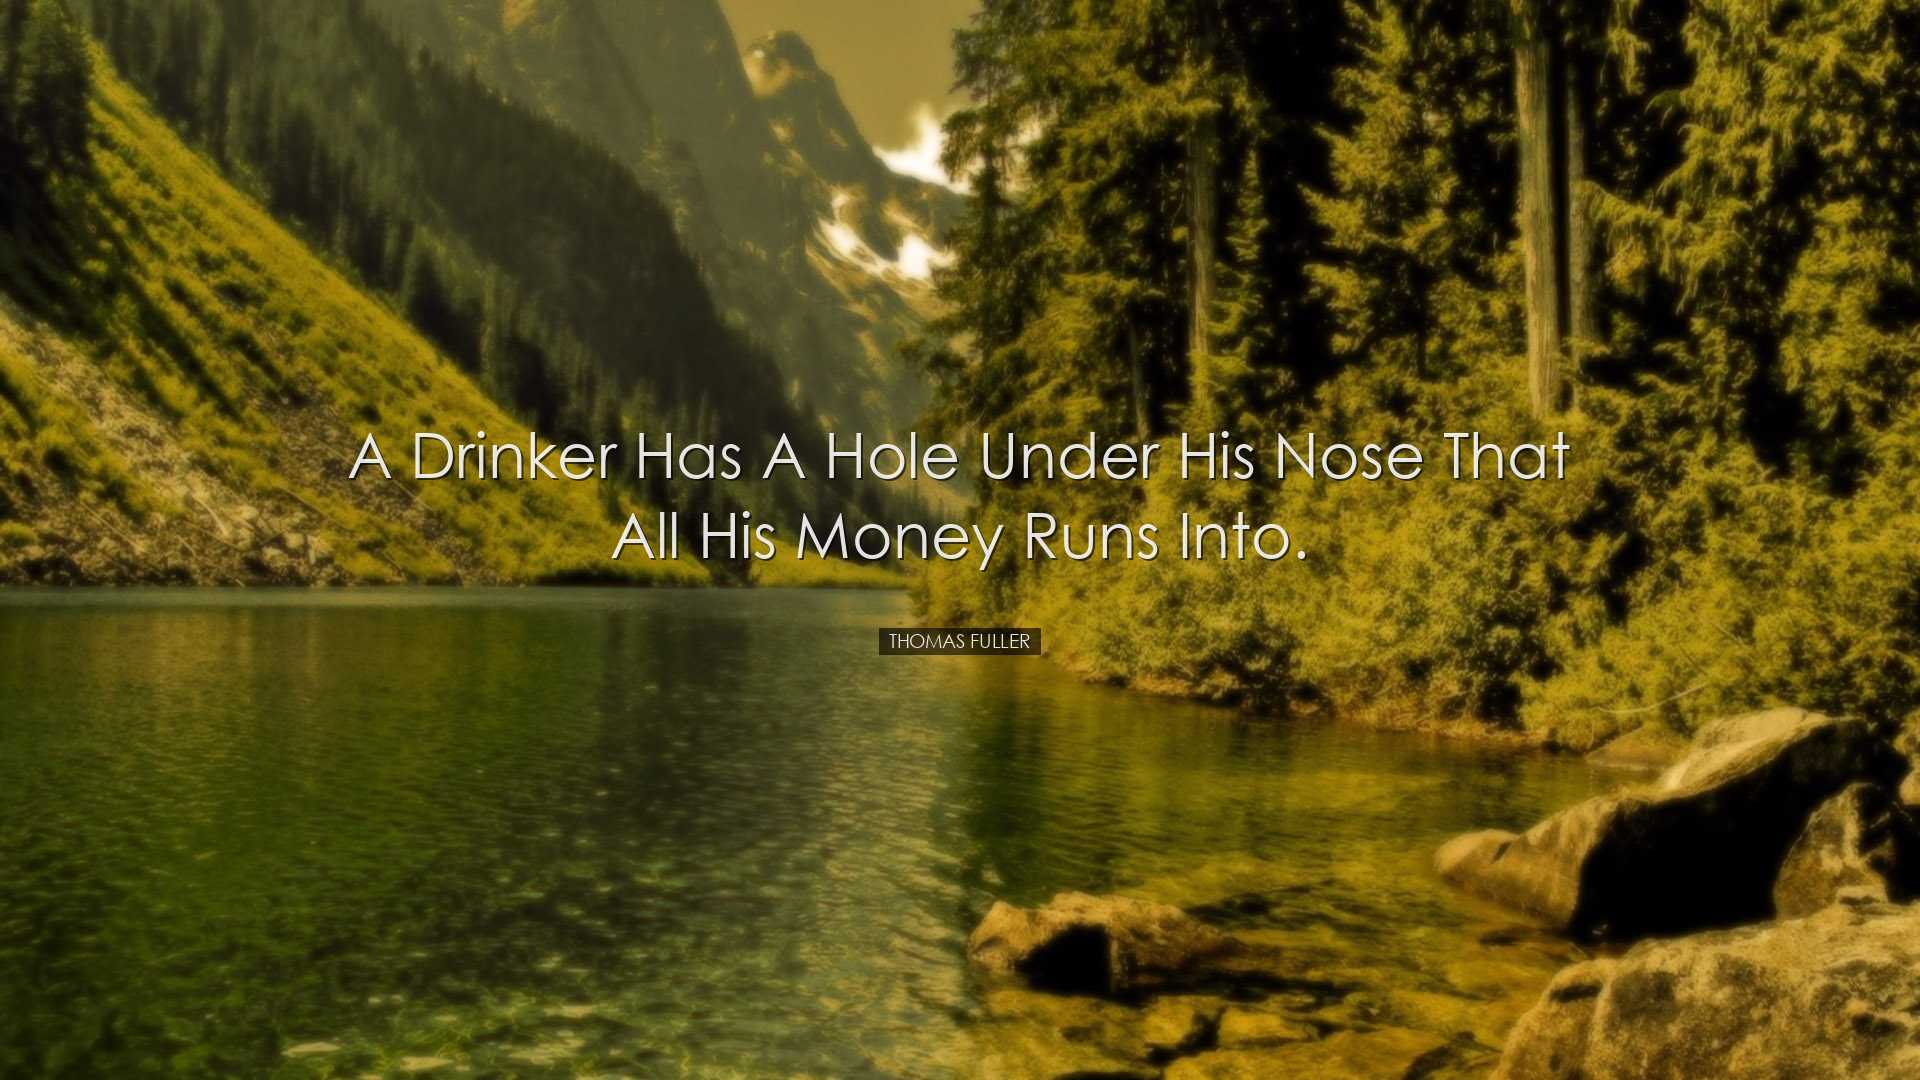 A drinker has a hole under his nose that all his money runs into.